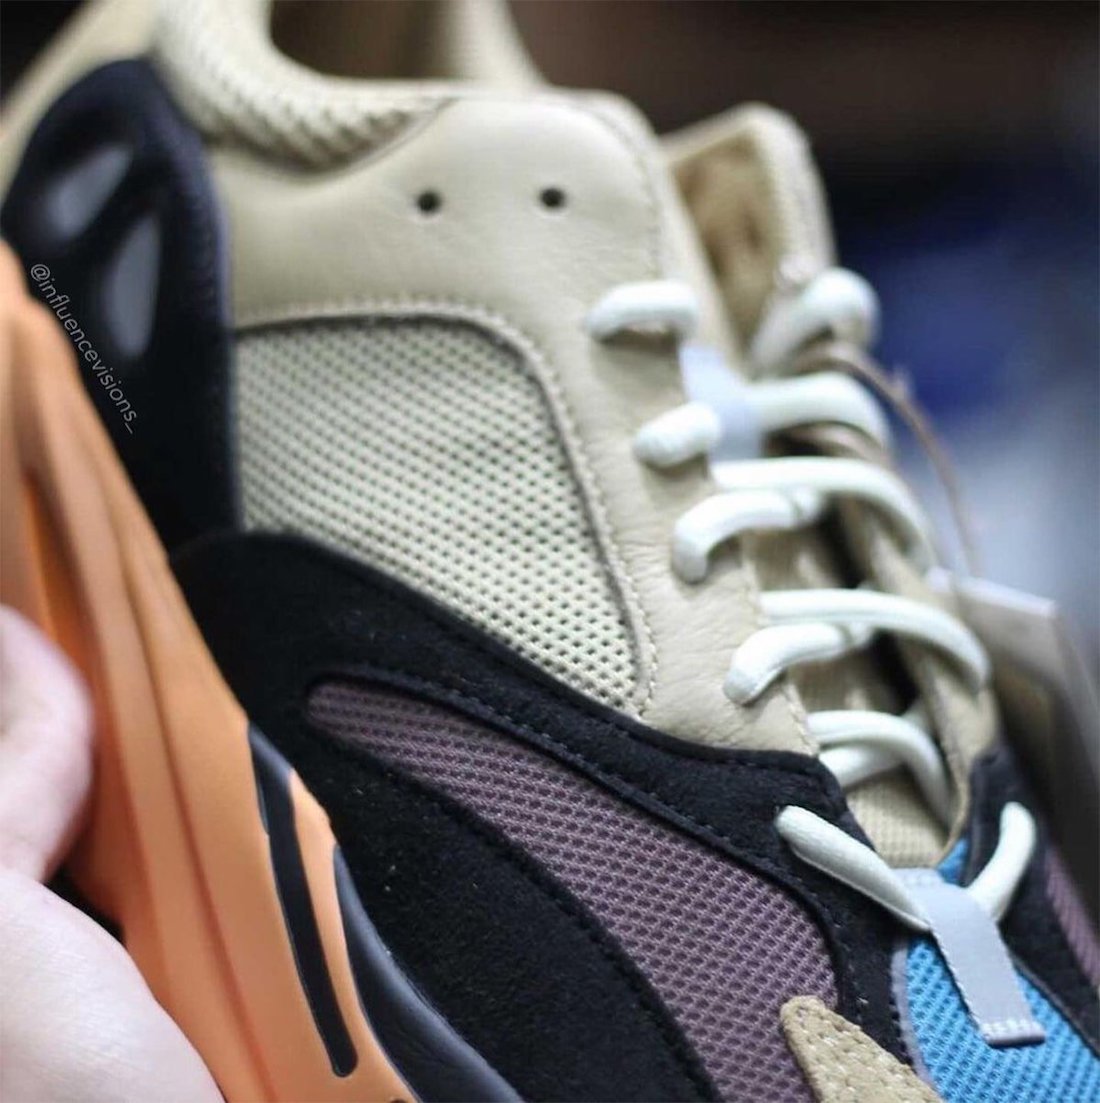 adidas yeezy boost 700 enflame amber release date 6